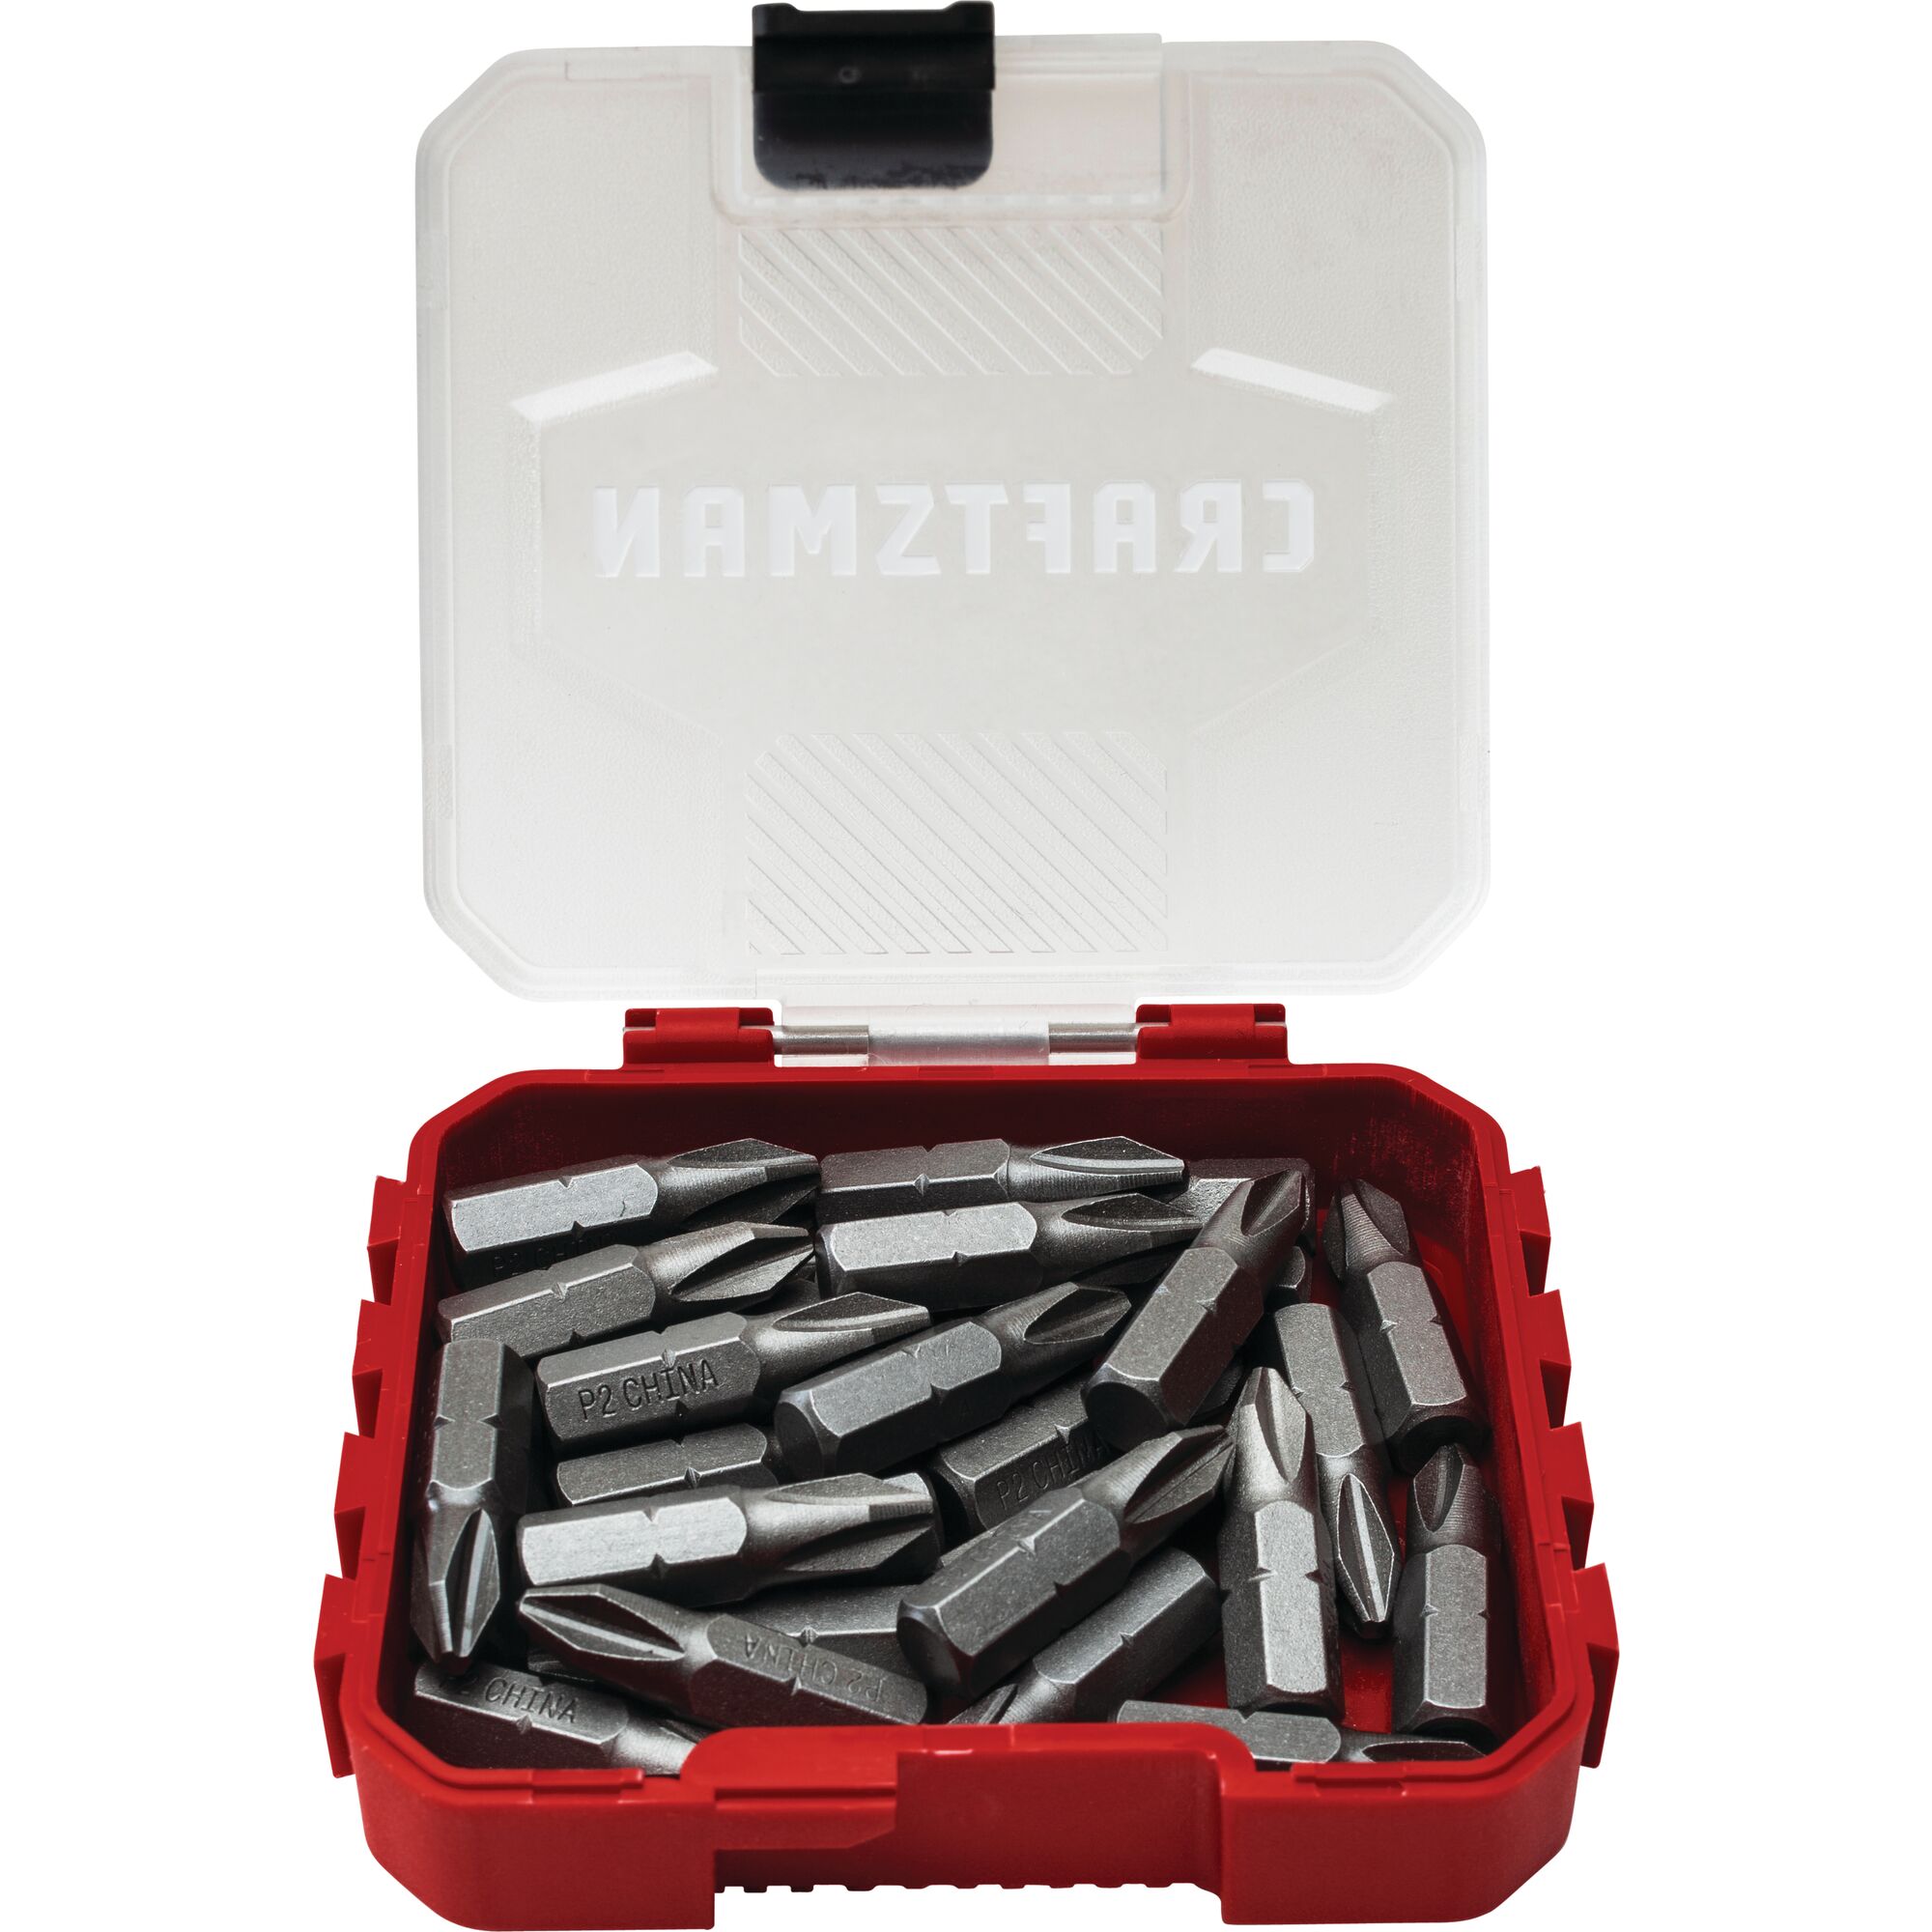 30 Piece 1 inch PHILLIPS Number 2 SCREWDRIVING SET in plastic case packaging with case lid open.